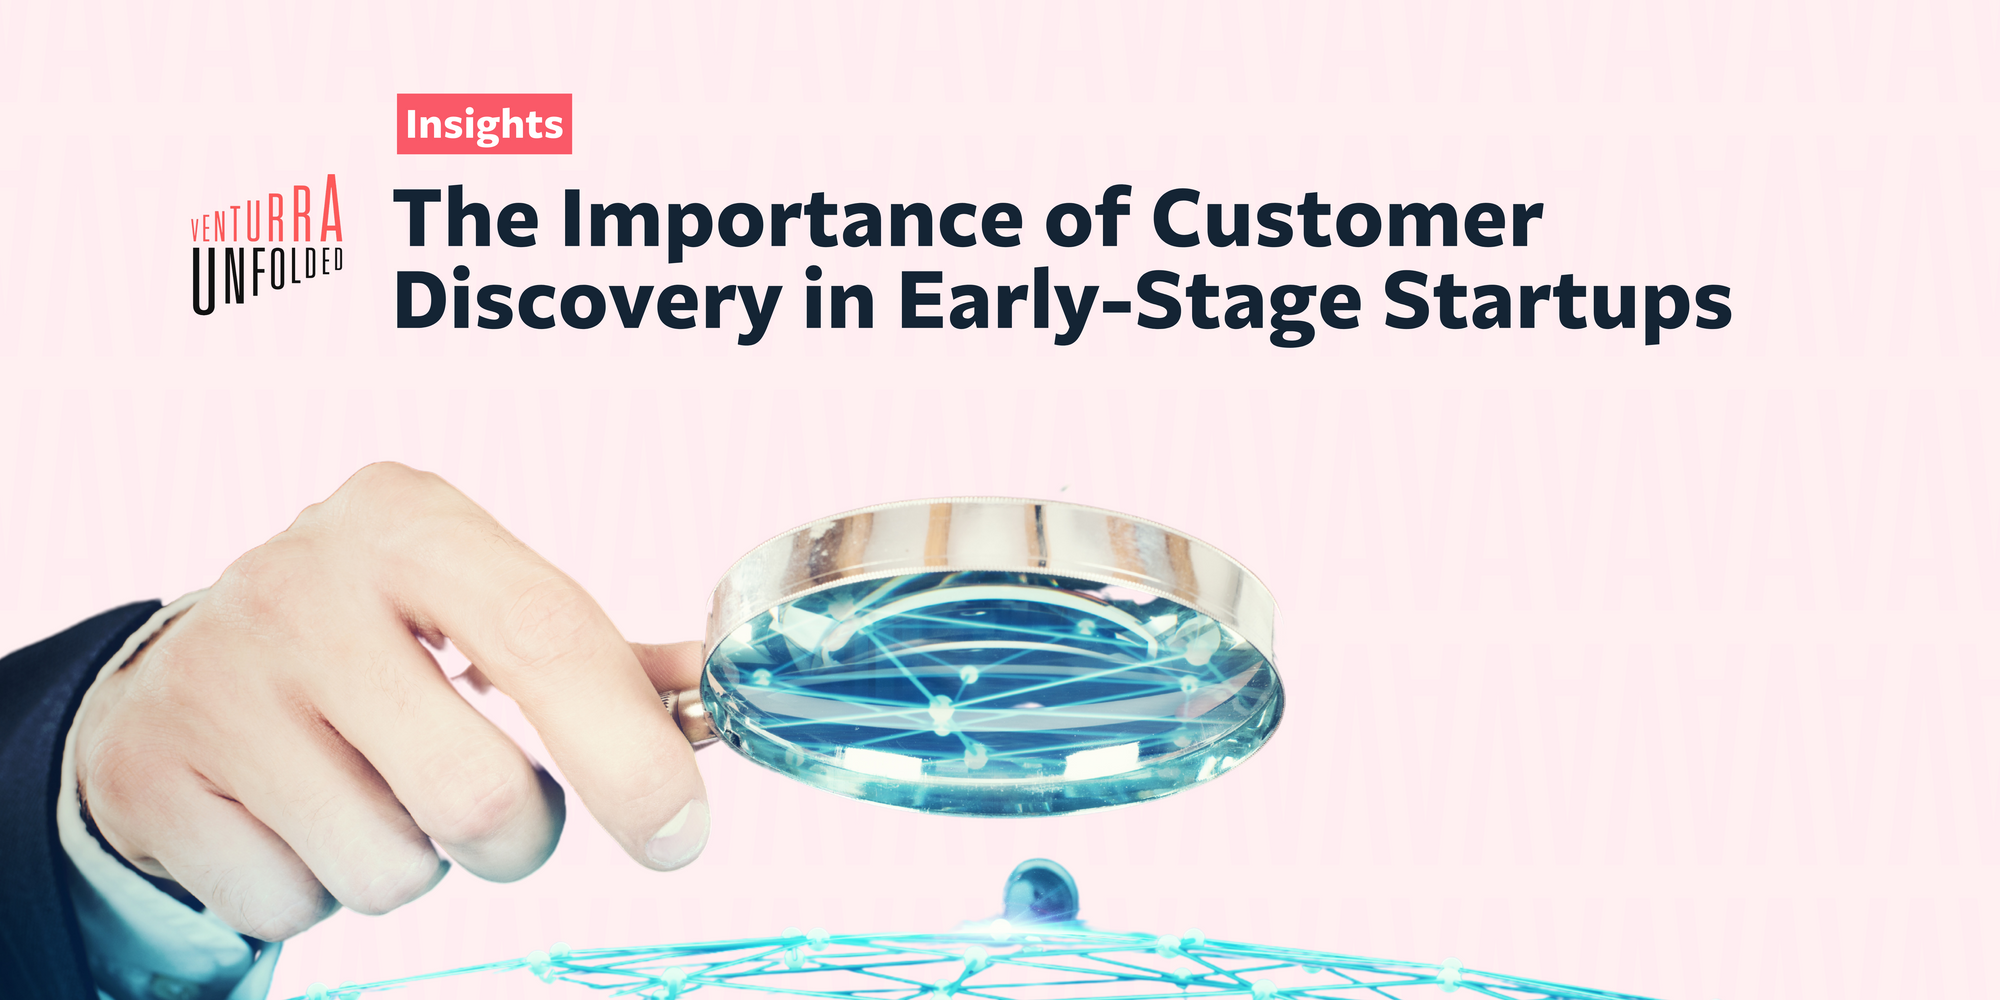 The Importance of Customer Discovery in Early-Stage Startups